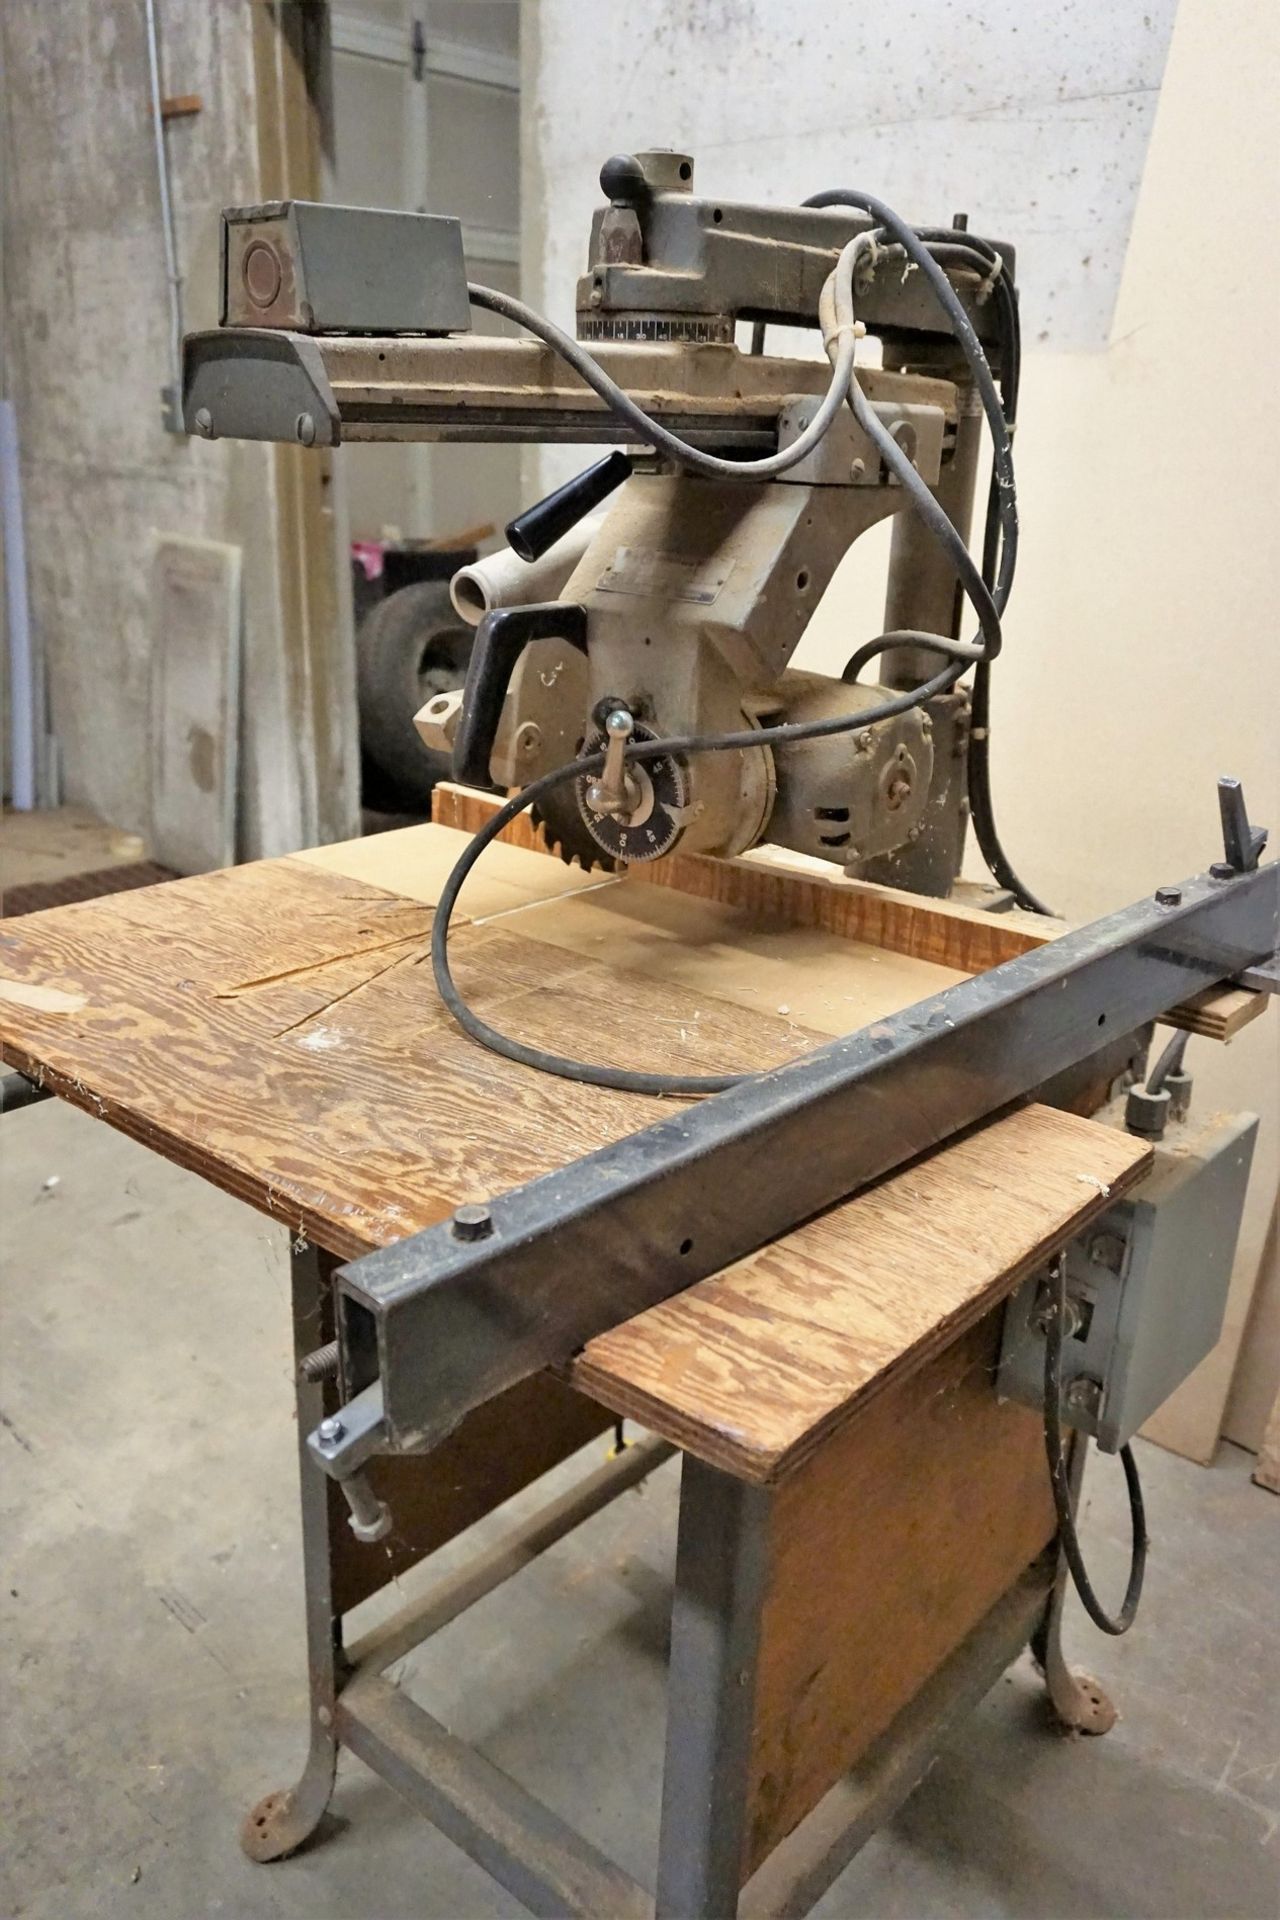 Craftsman Table Saw with Beaver Radial Arm Drill with Asst. 4' x 8' Sheets, Plywood, Chip Board MDF - Image 2 of 5